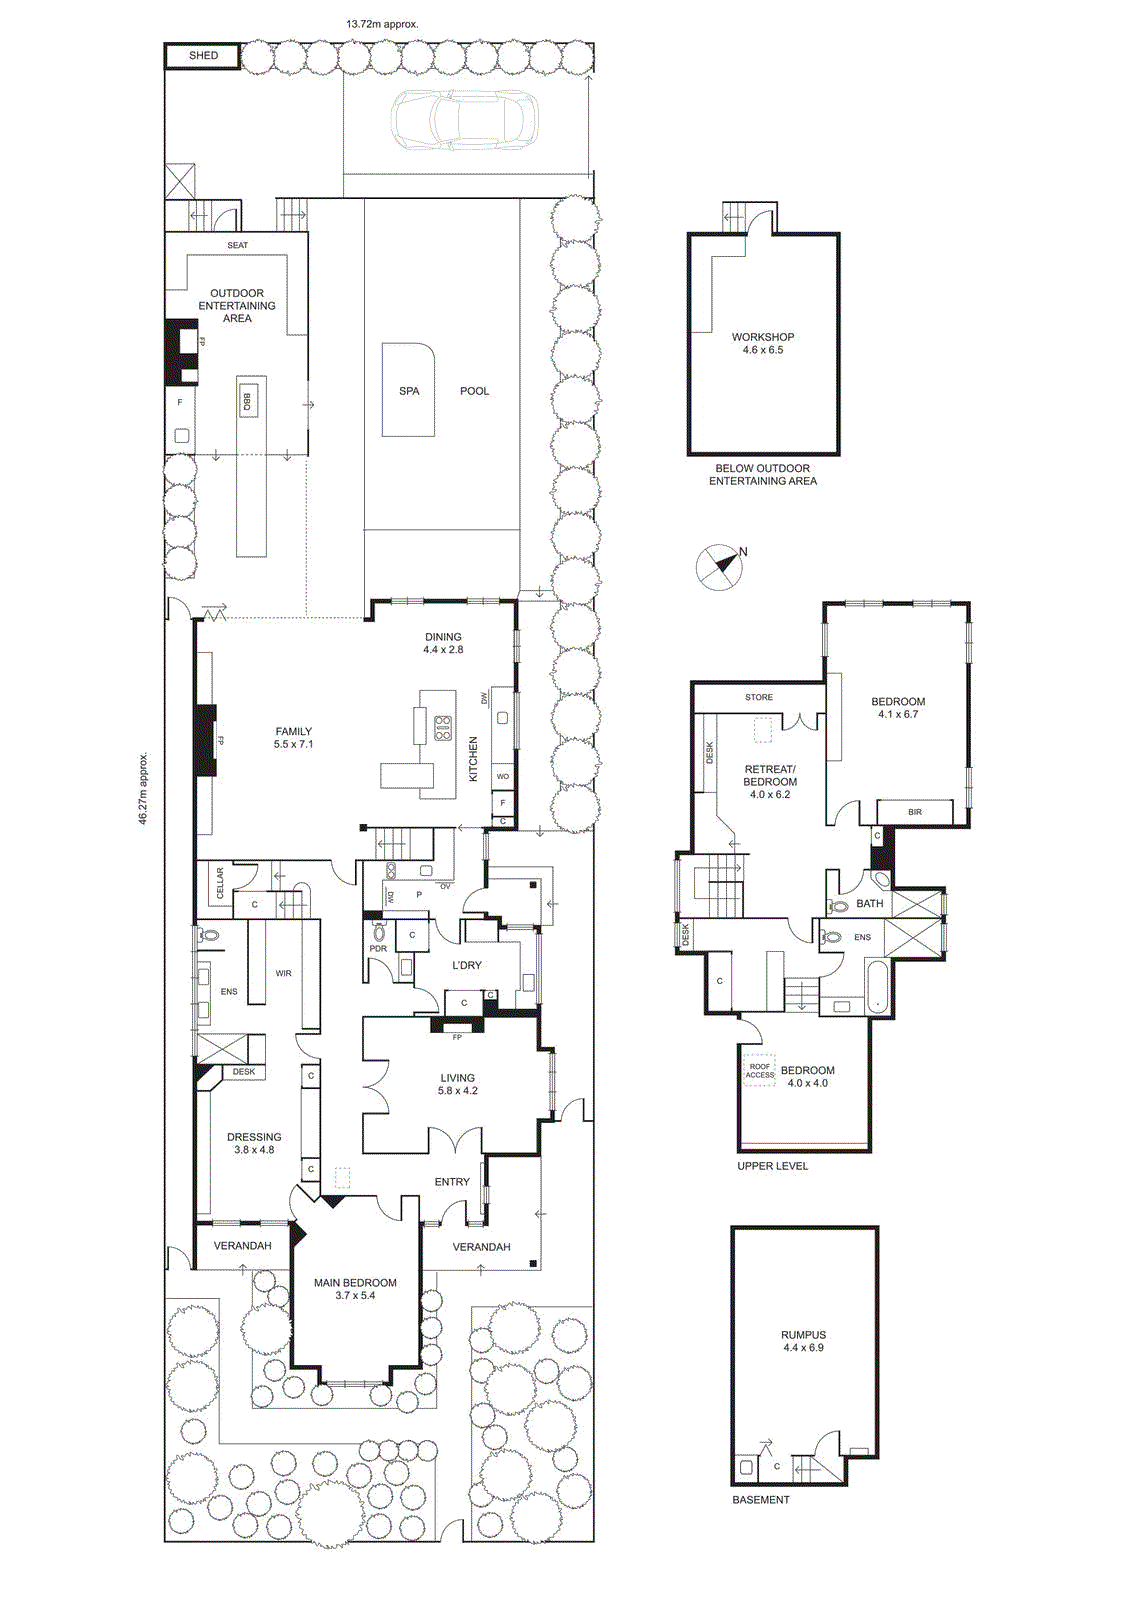 https://images.listonce.com.au/listings/76-armstrong-street-middle-park-vic-3206/144/01130144_floorplan_01.gif?kf9Dcz4q4vQ